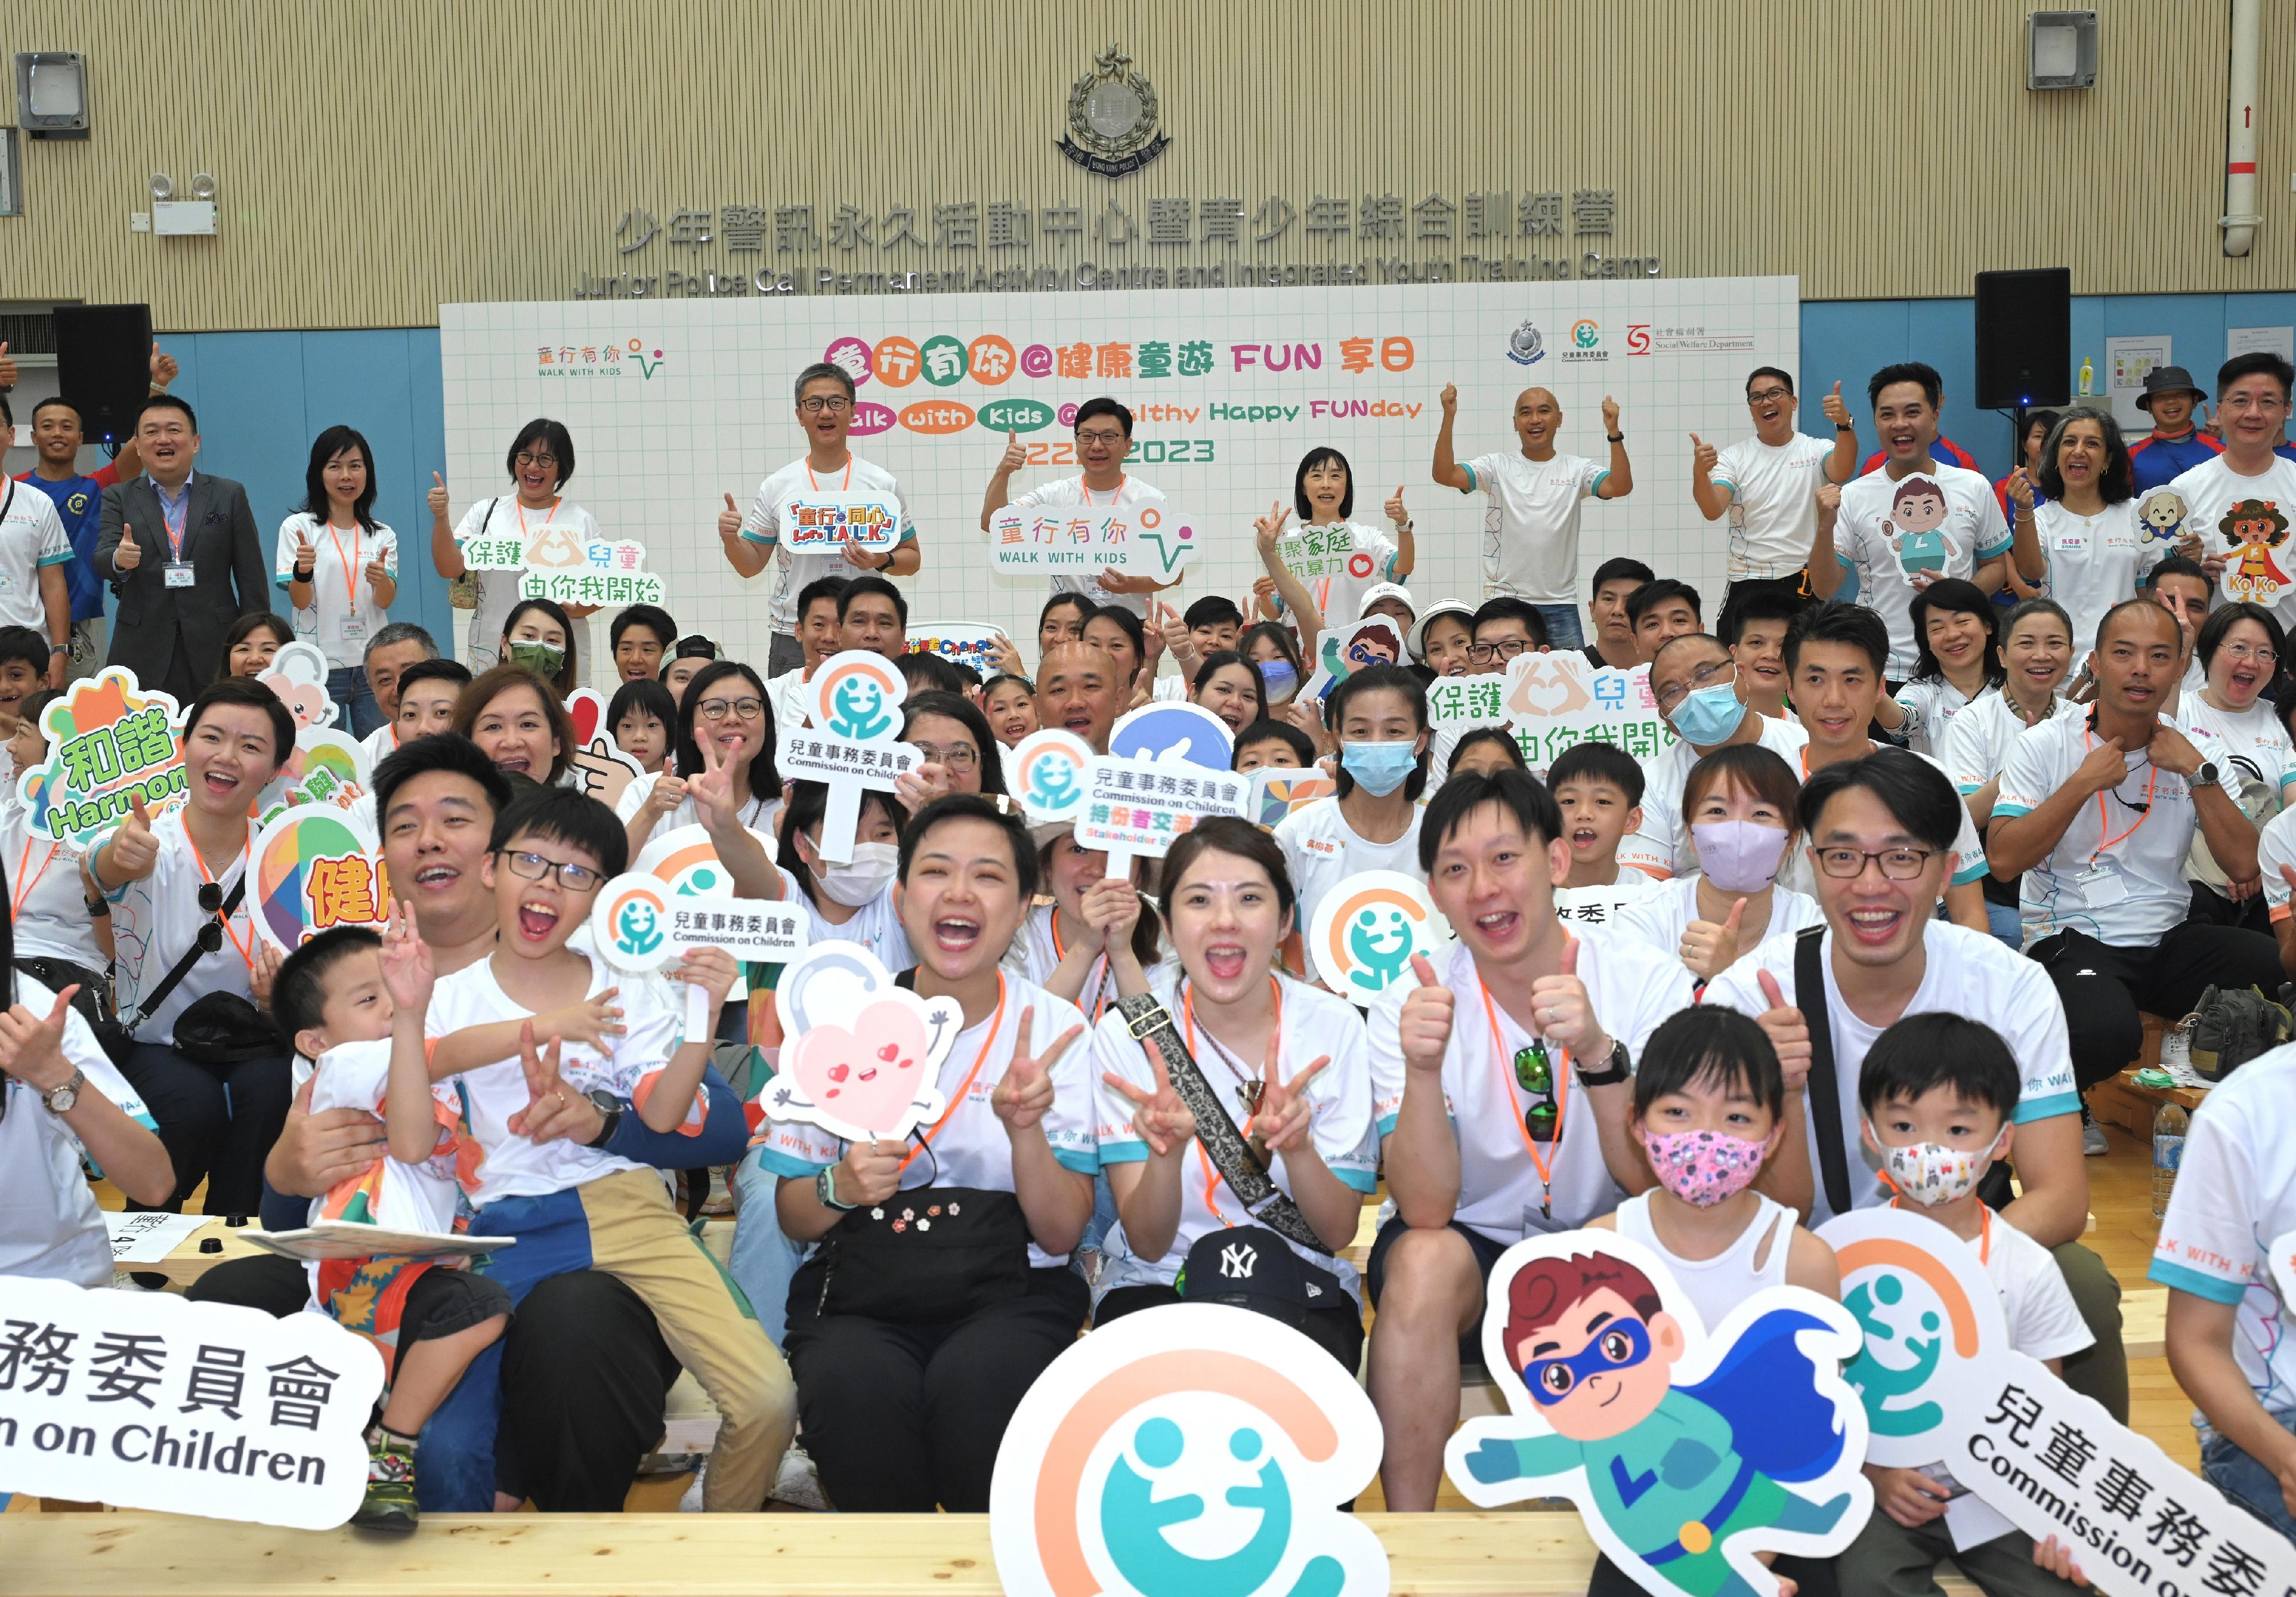 The Commission on Children, the Hong Kong Police Force and the Social Welfare Department today (June 22) jointly held the Walk with Kids@Healthy Happy FUNday at the Junior Police Call Permanent Activity Centre and Integrated Youth Training Camp at Pat Heung. Parents and children joined a variety of interactive games and activities, thereby enhancing their awareness on the importance of physical and mental health. Photo shows (standing, from fourth left) the Commissioner of Police, Mr Siu Chak-yee; the Secretary for Labour and Welfare, Mr Chris Sun; and the Director of Social Welfare, Miss Charmaine Lee, as well as children and their parents participating in the event.